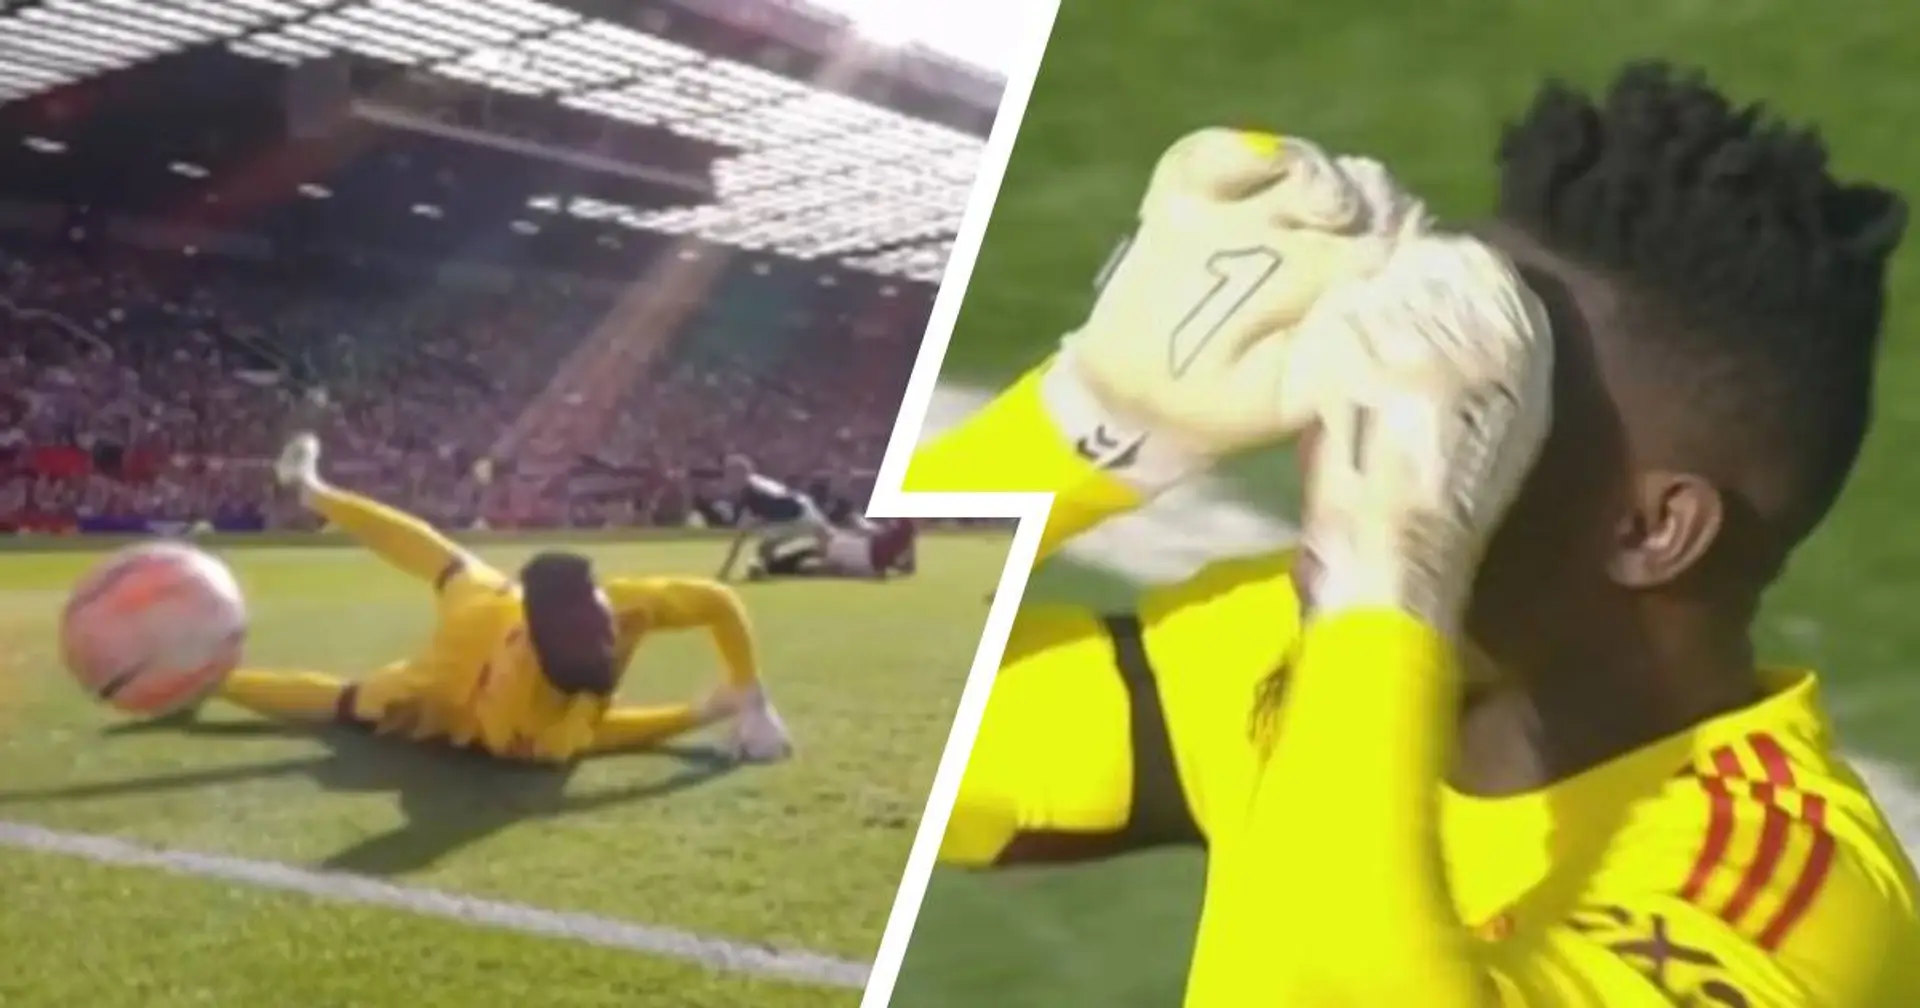 Onana's frustration at another cheap goal caught on camera